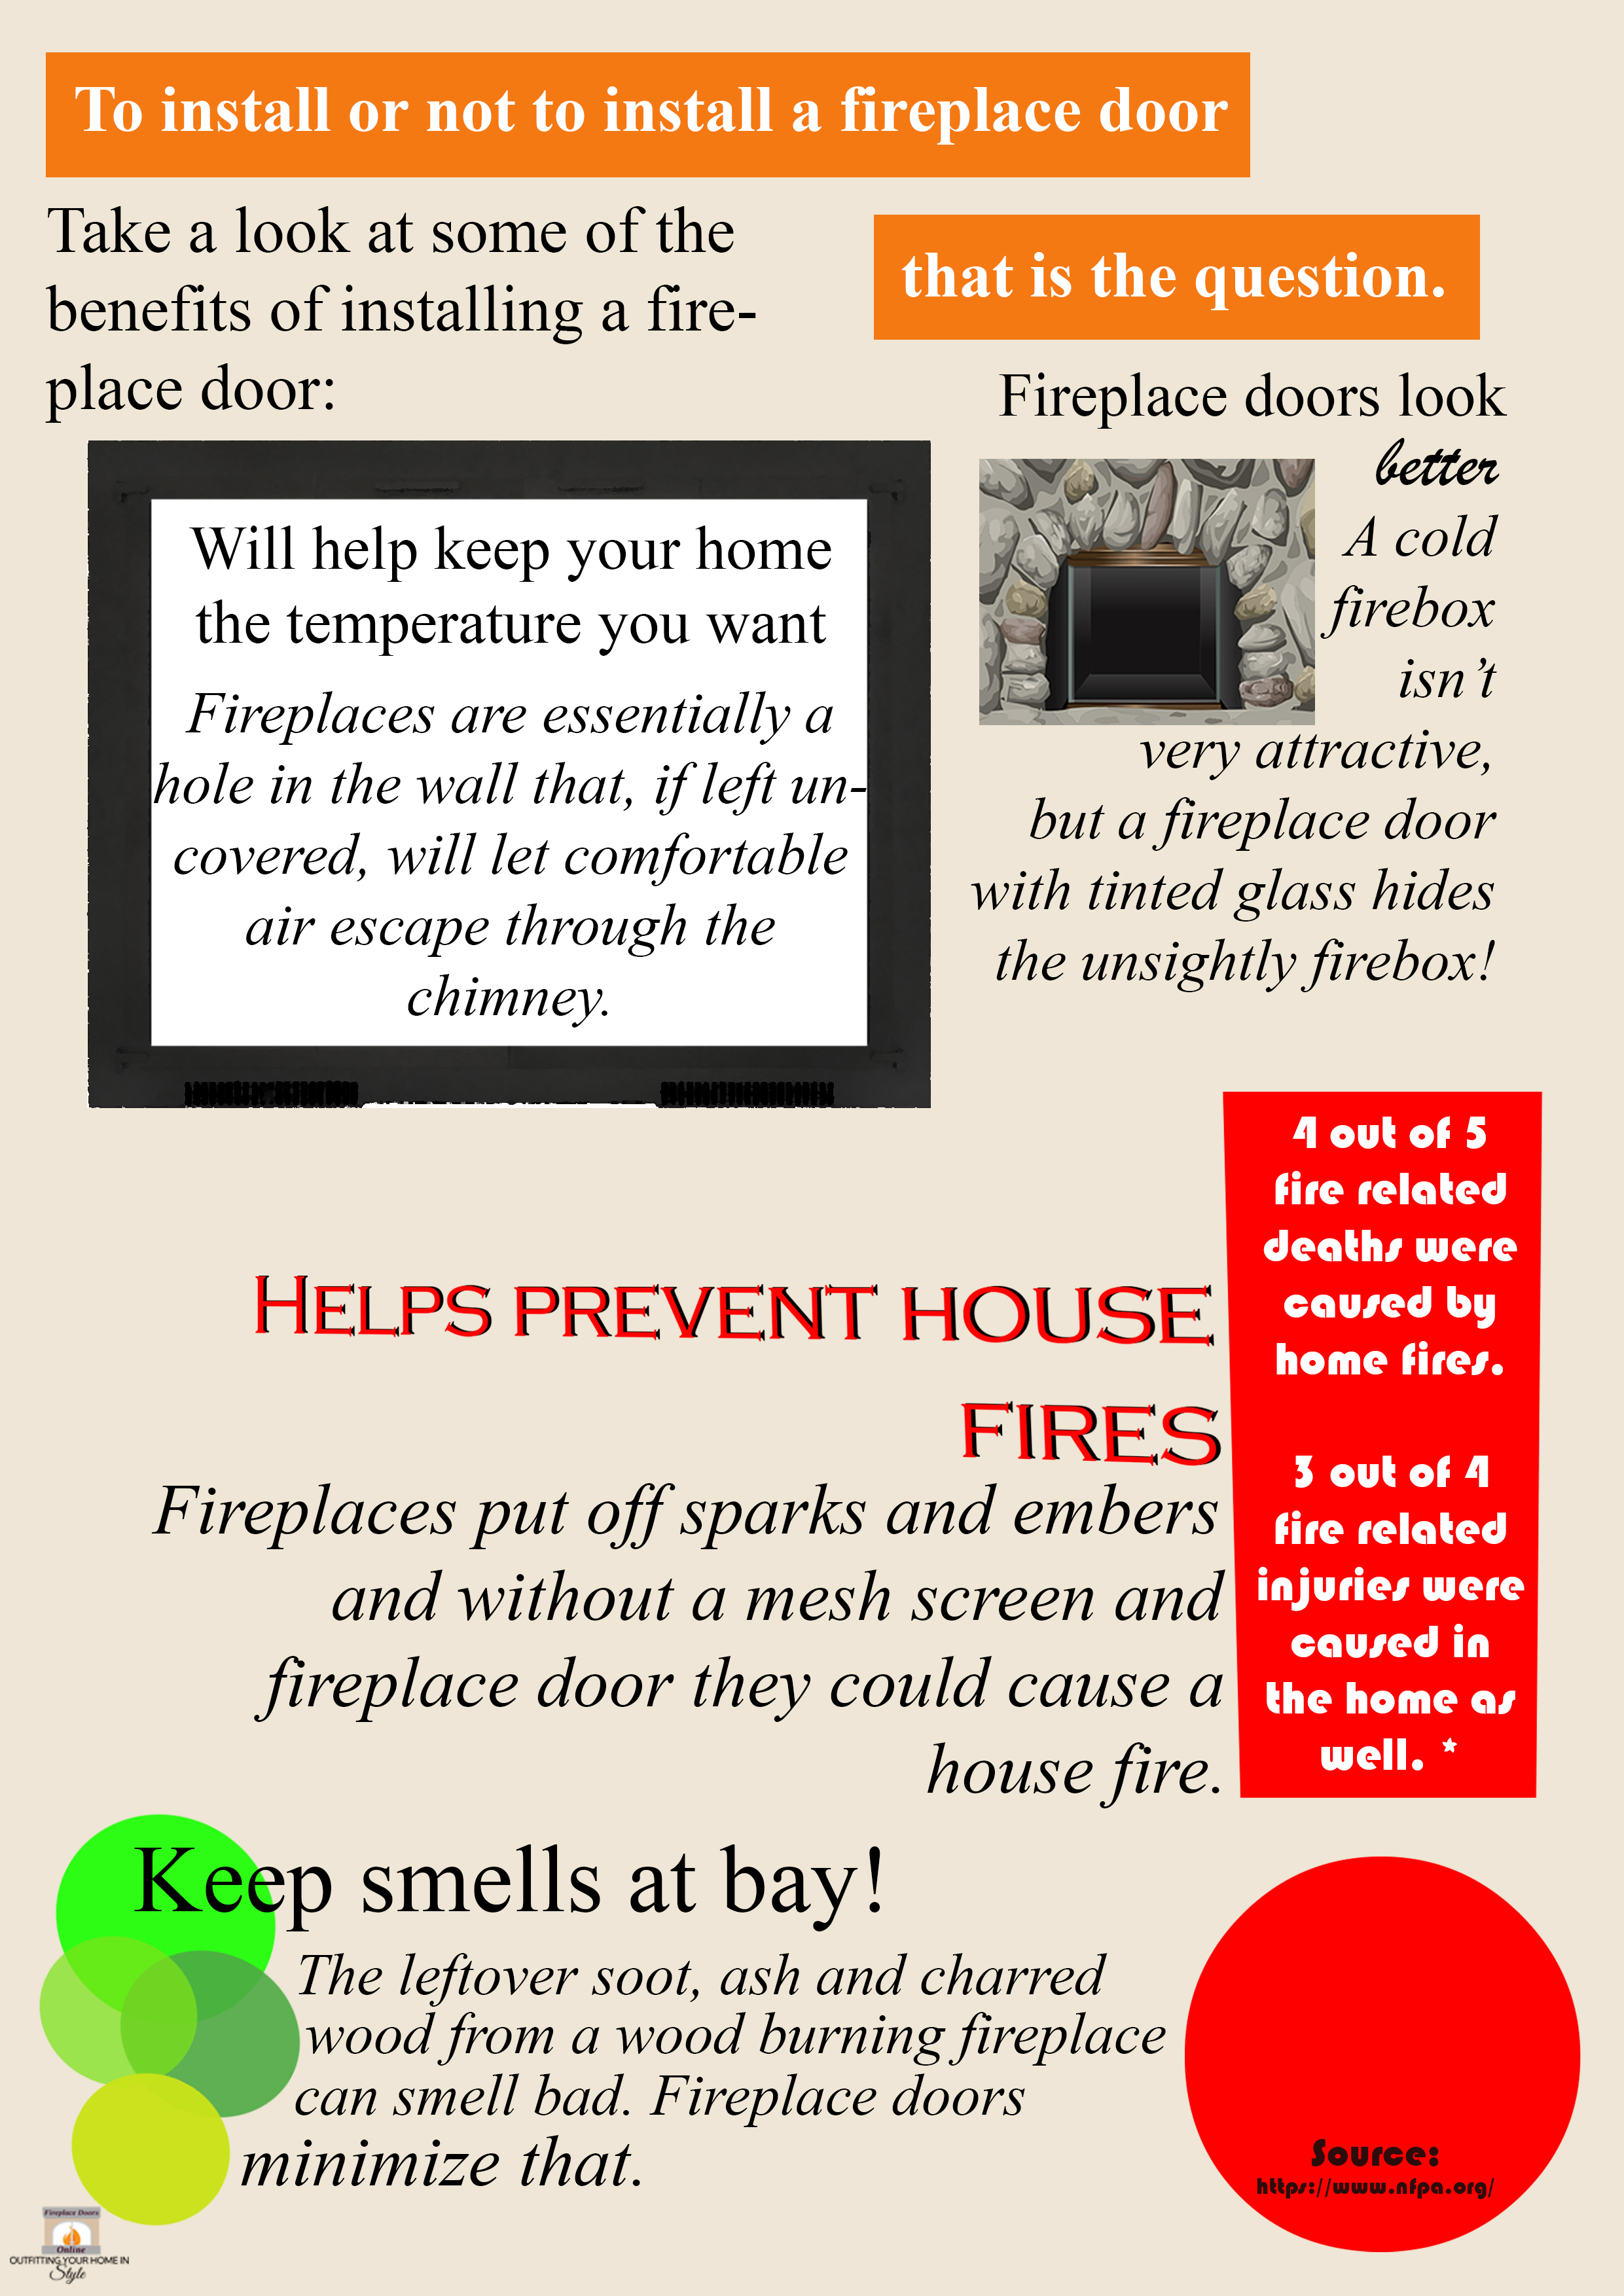 An infographic on the advantages of installing a fireplace door